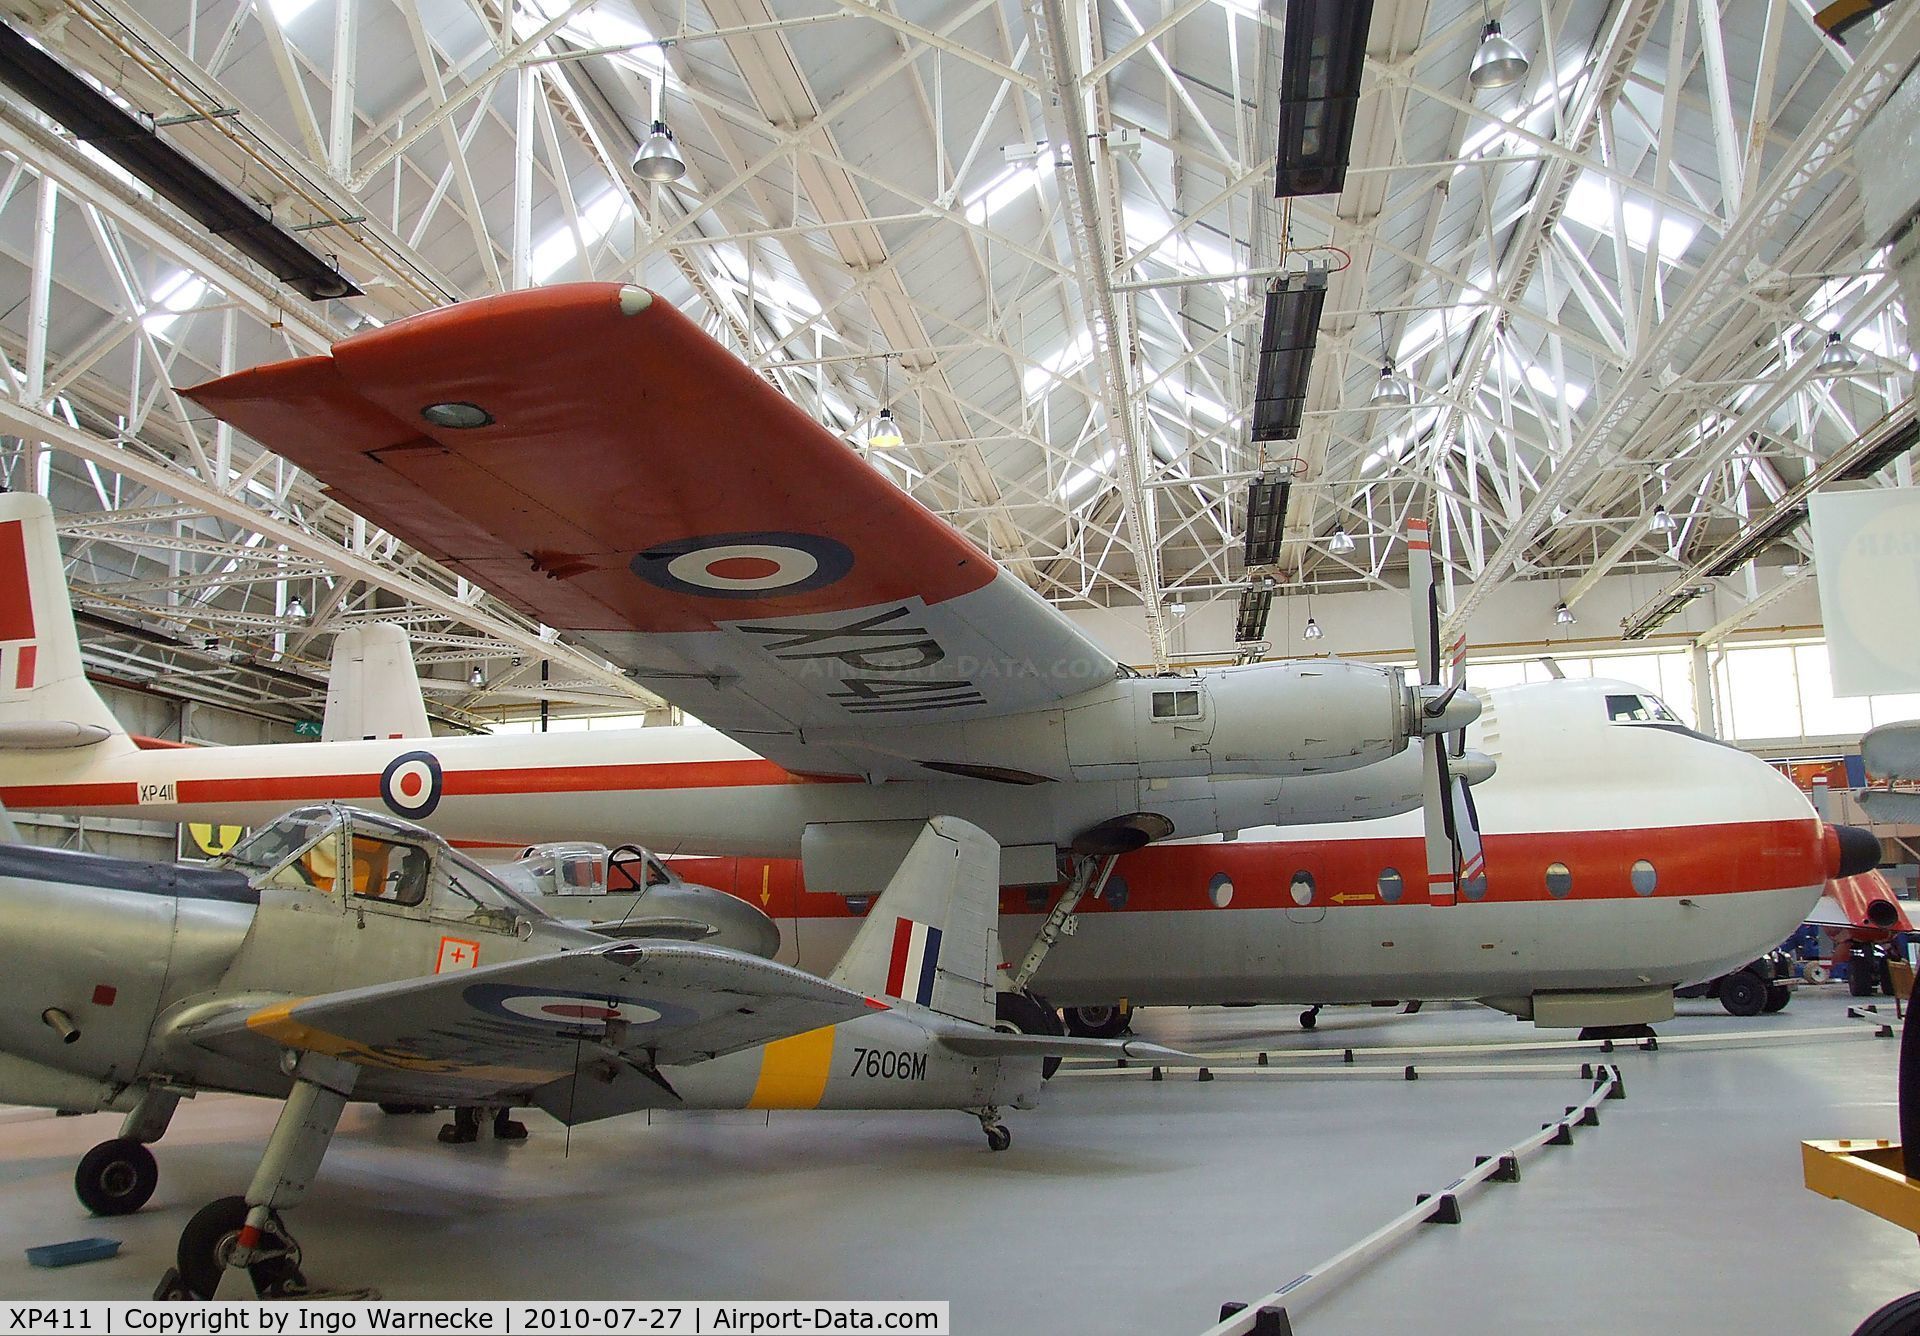 XP411, 1962 Armstrong Whitworth AW-660 Argosy C.1 C/N 6766, Armstrong Whitworth 650 Argosy T1 at the RAF Museum, Cosford